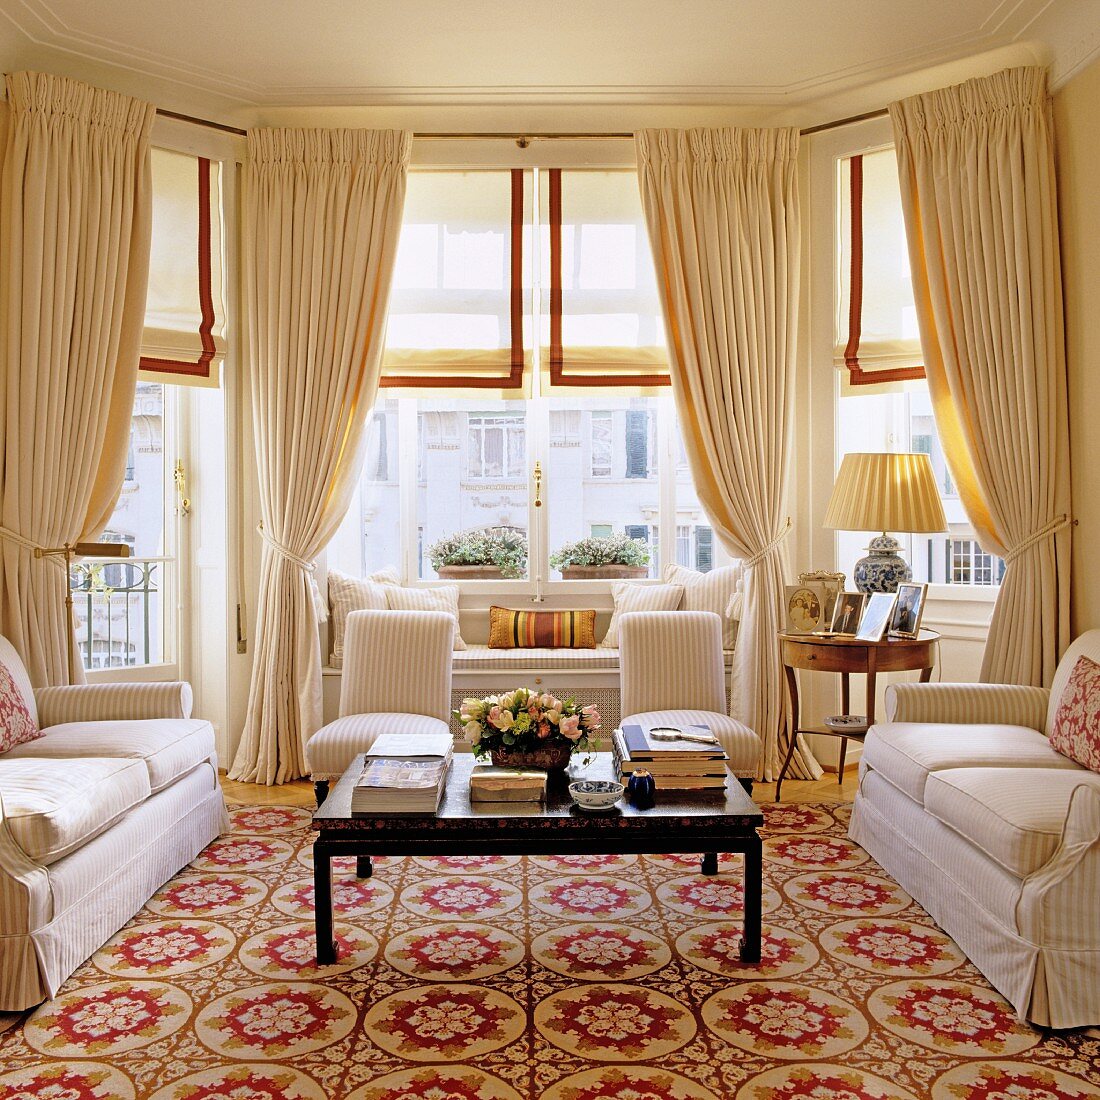 Luxuriously furnished interior with sofa set and coffee table on patterned rug in front of bay window with draped curtains